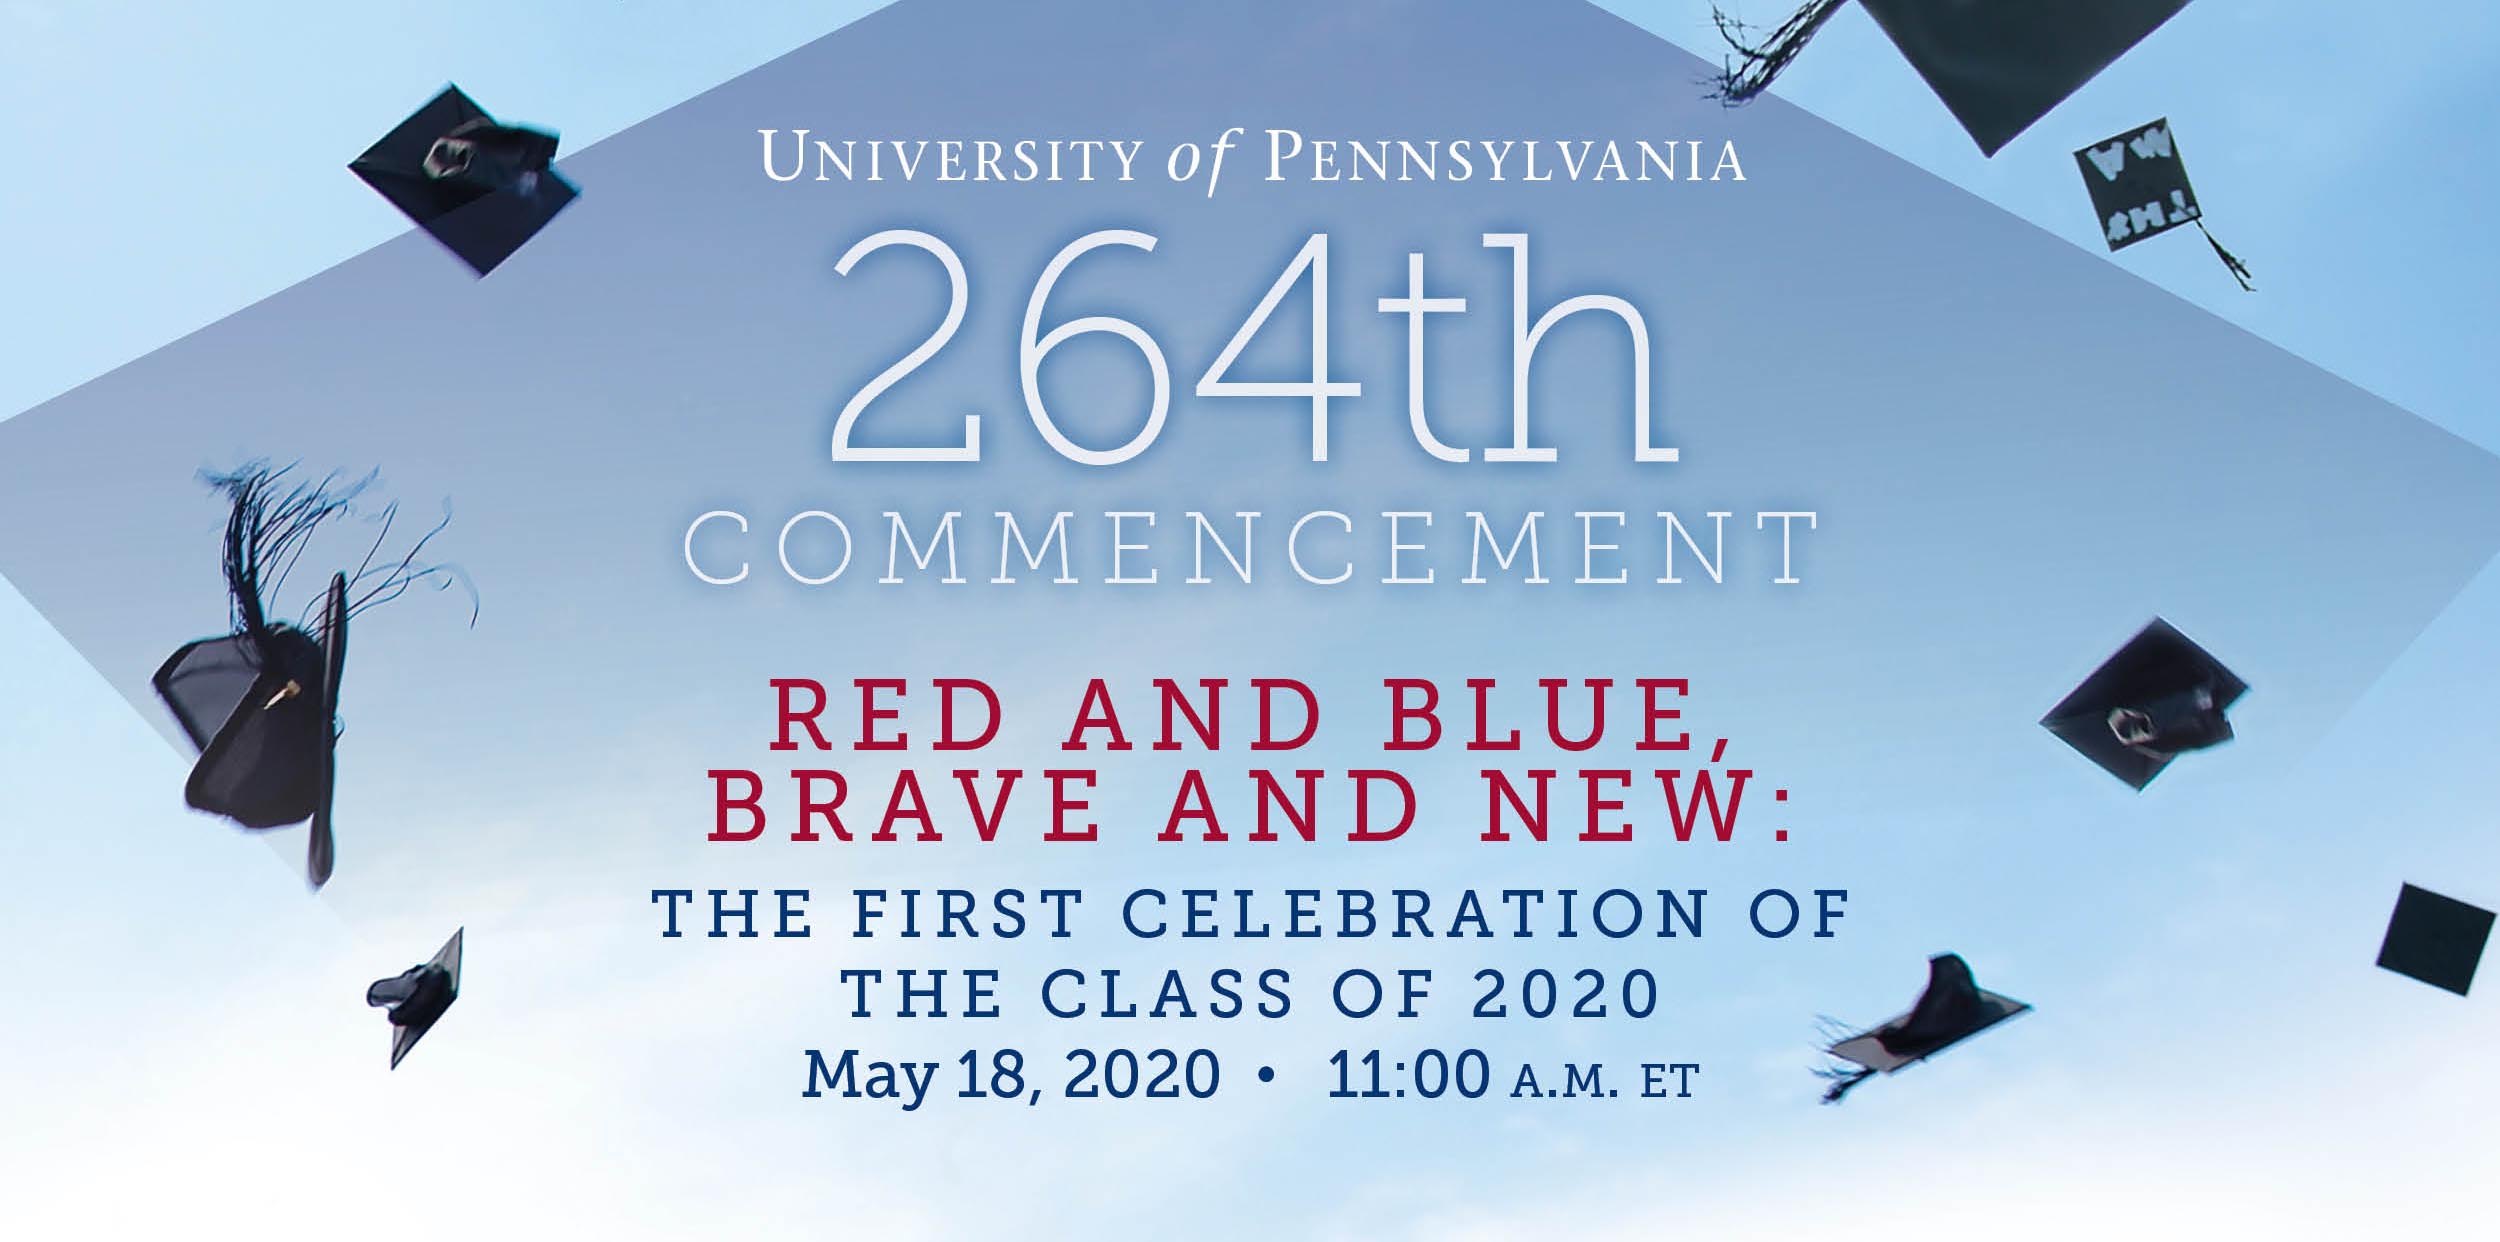 Blue sky with invitation message for virtual Commencement.